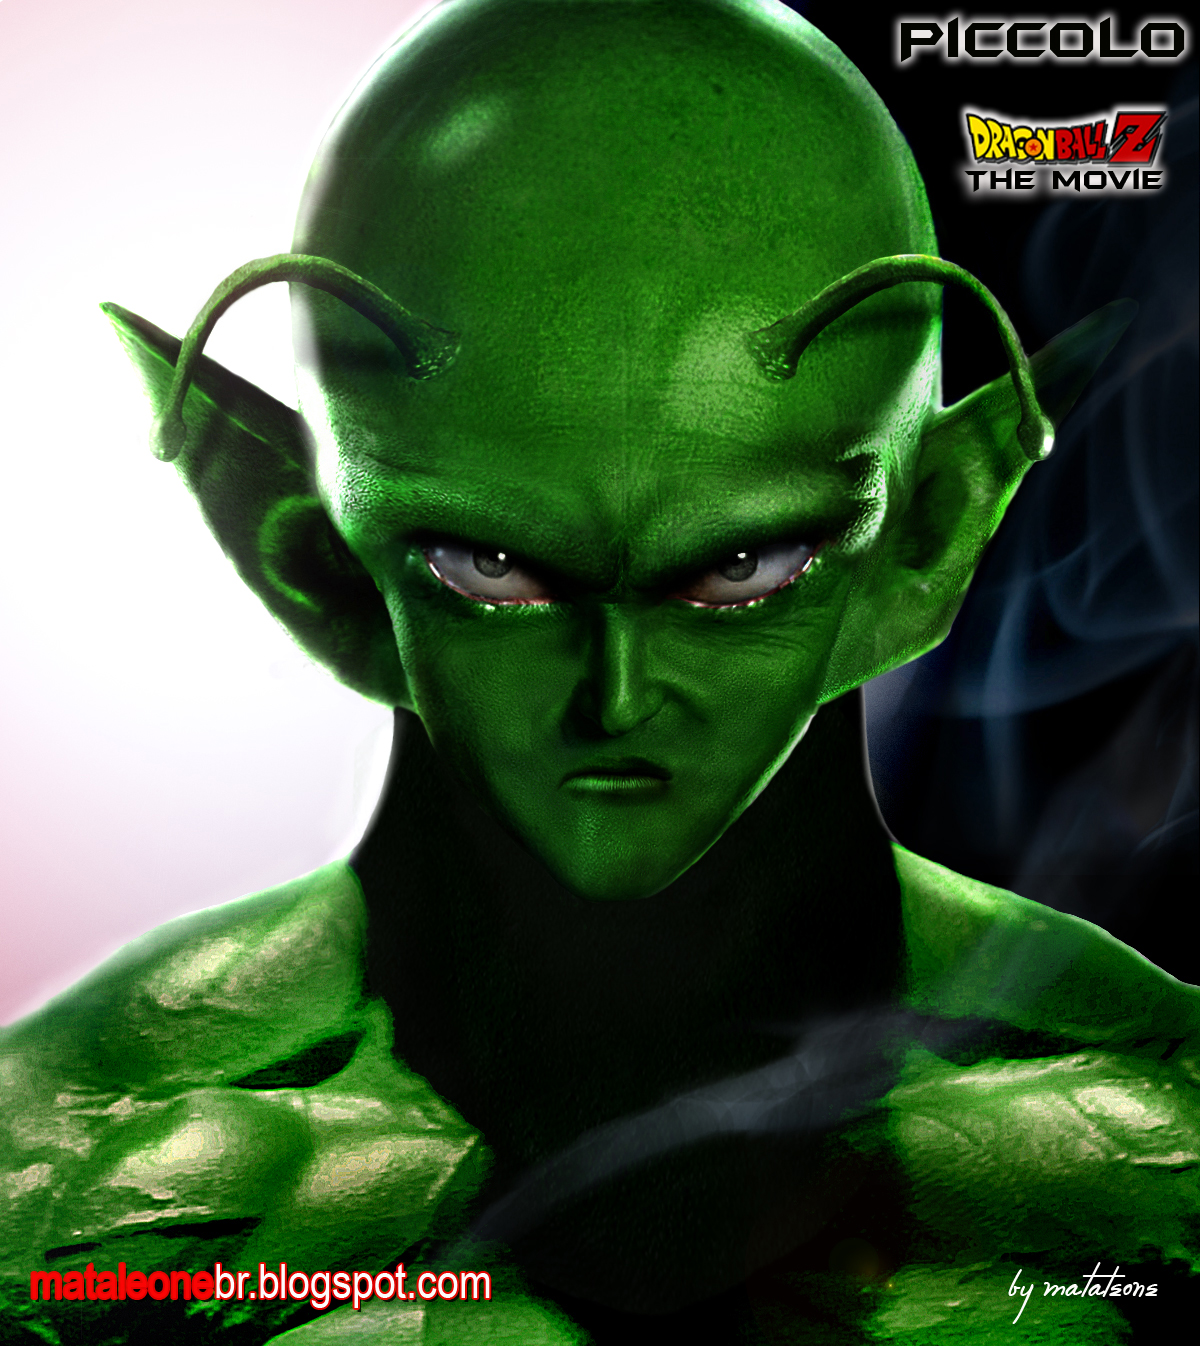 Dragon Ball: Piccolo - Images Gallery